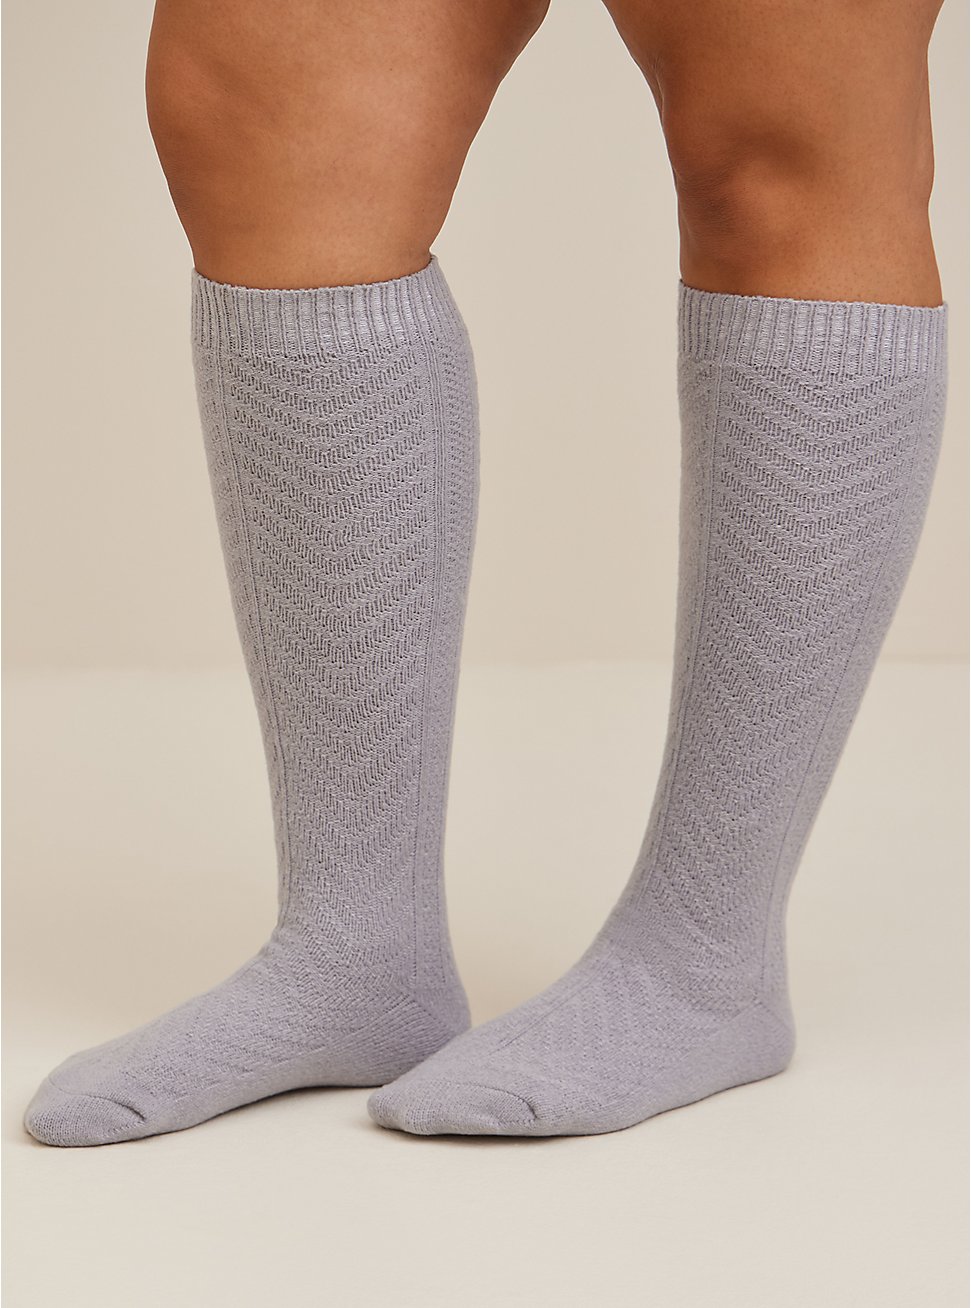 Cable Knit Knee-High, GREY, hi-res